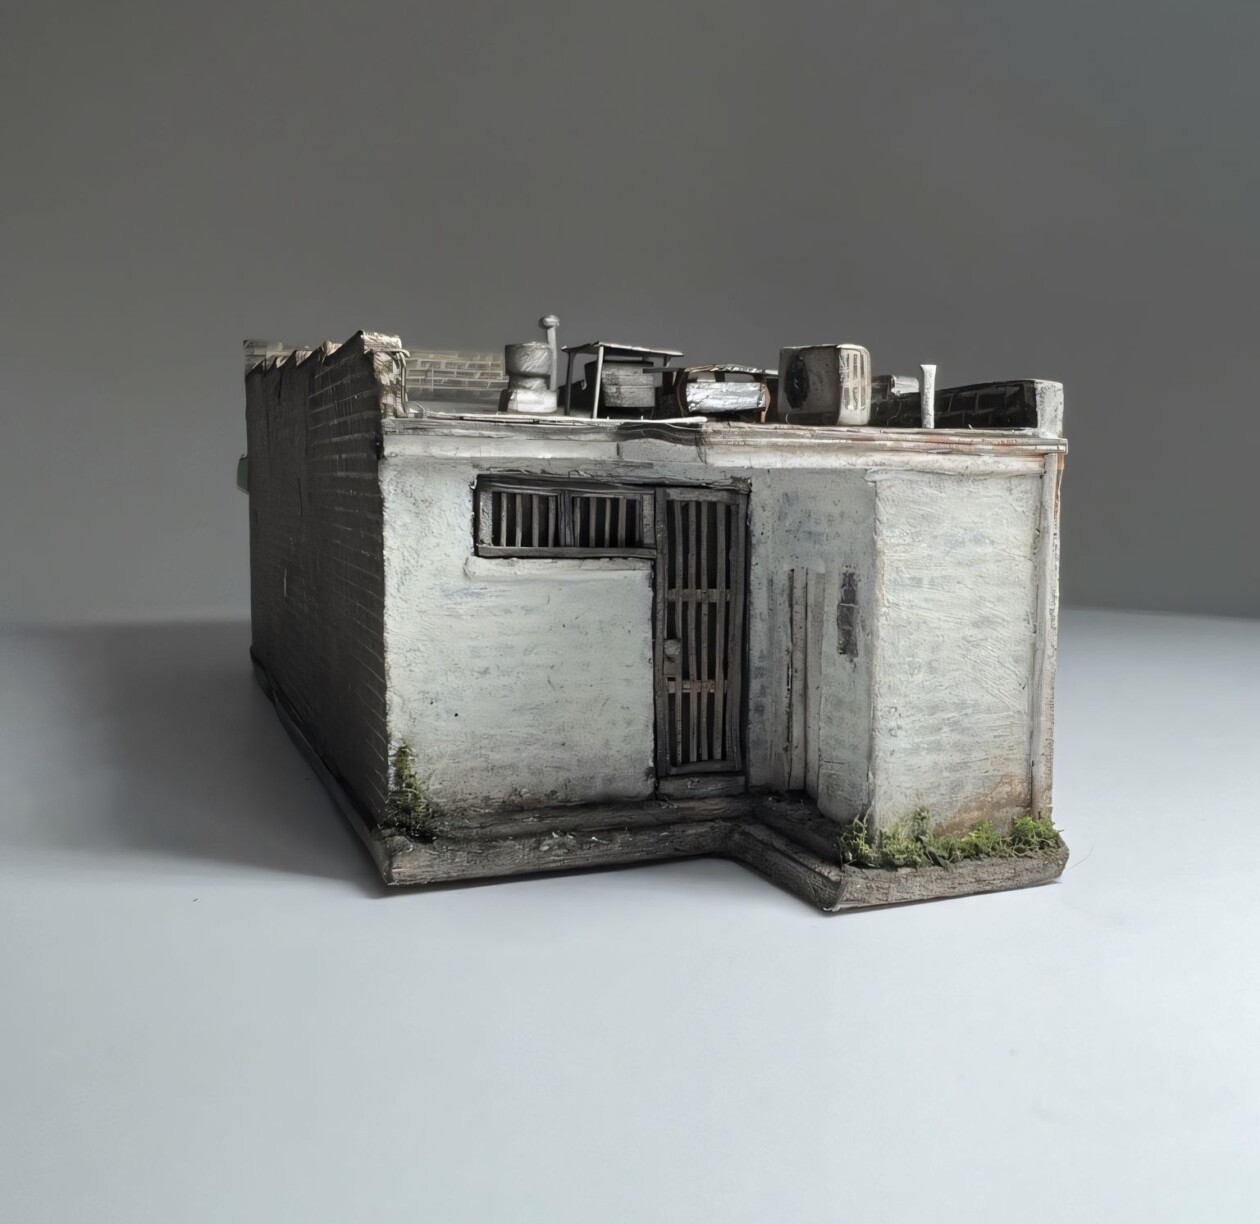 Whimsical Everyday Life And Historical Buildings In Miniature By Mylyn Nguyen (5)